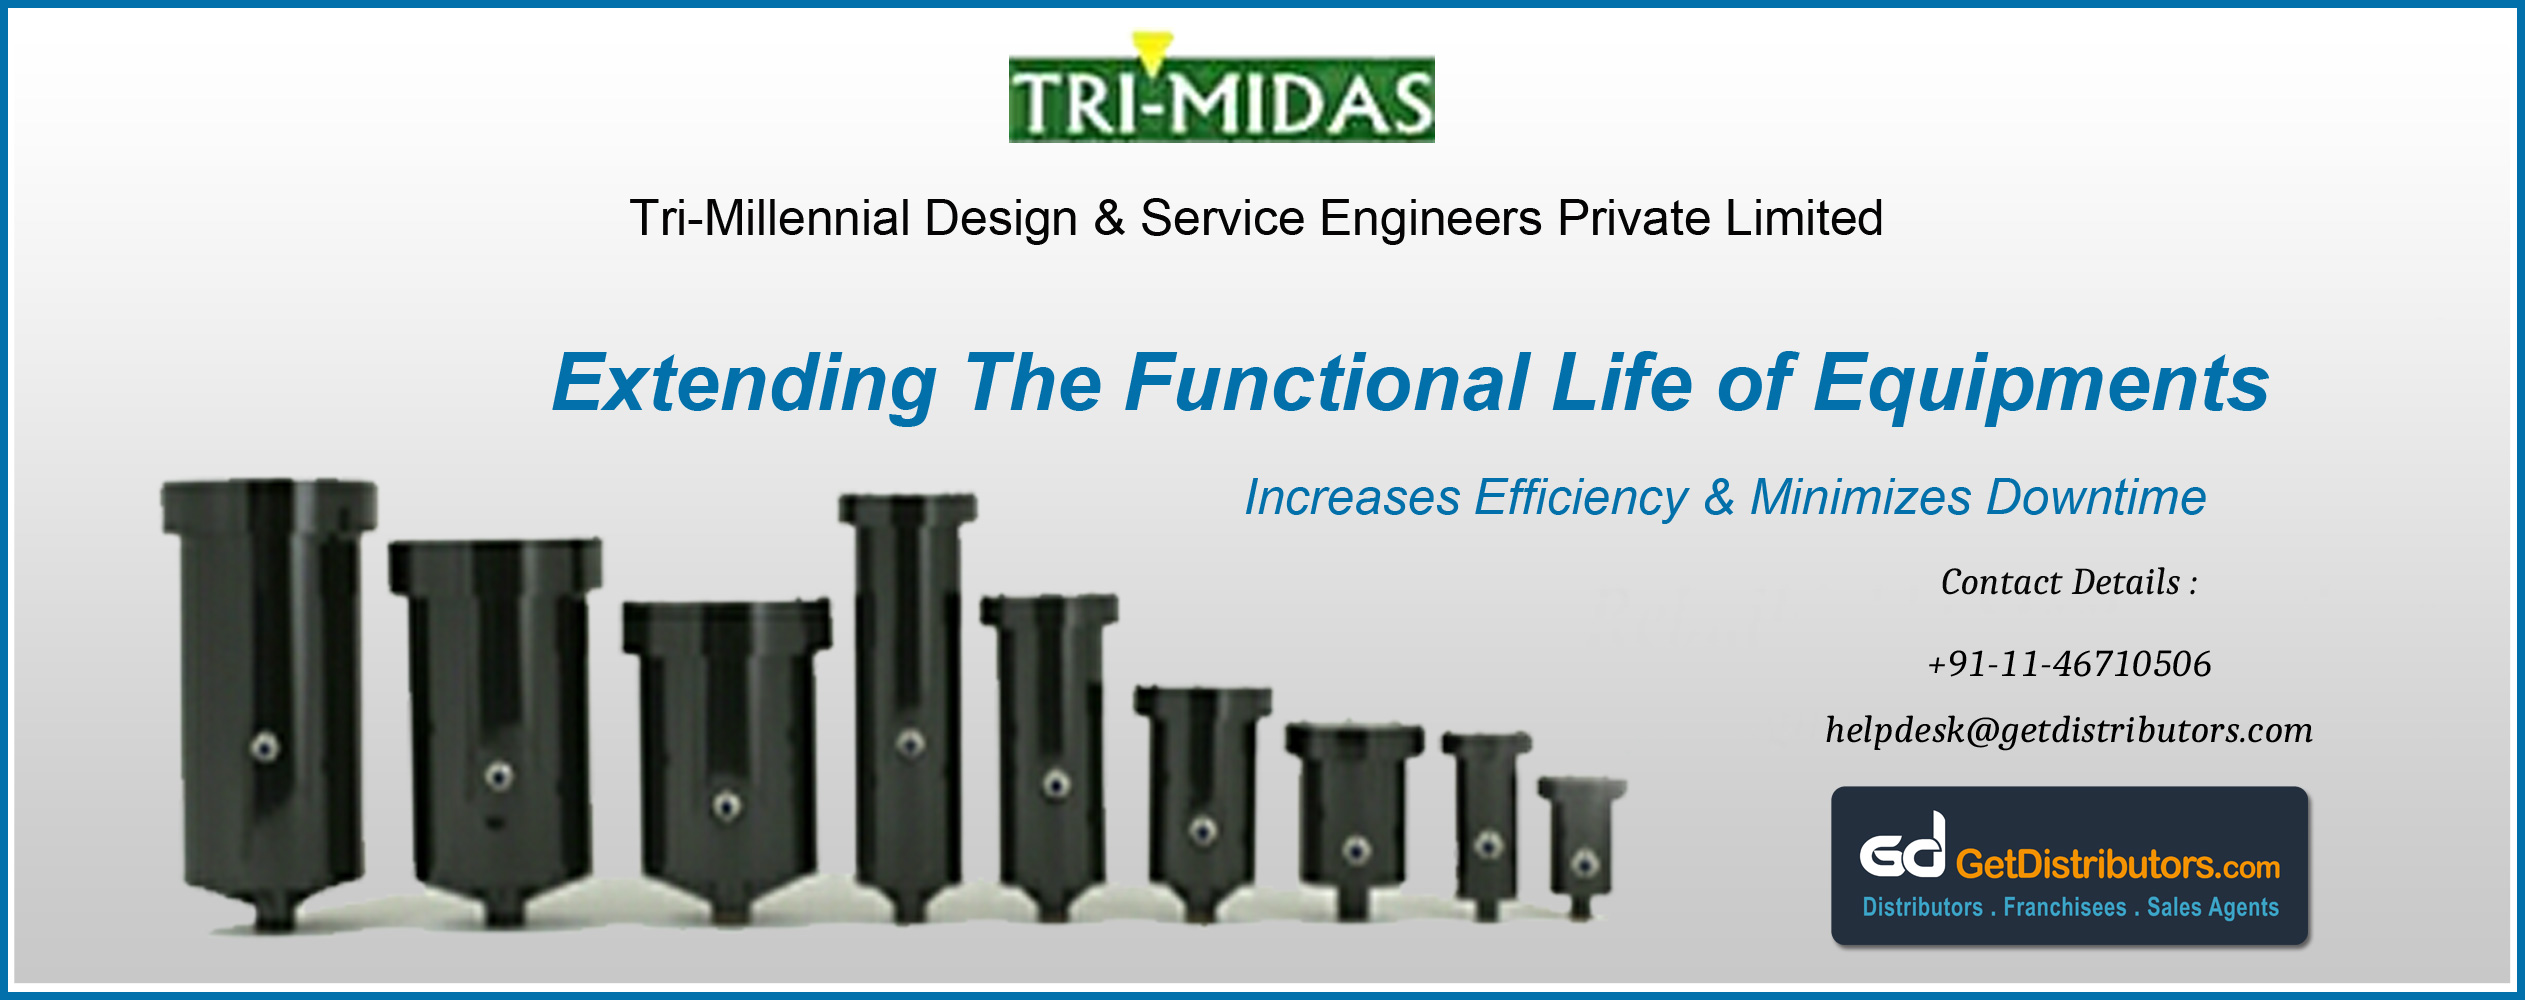 Extending The Functional Life Of Equipments